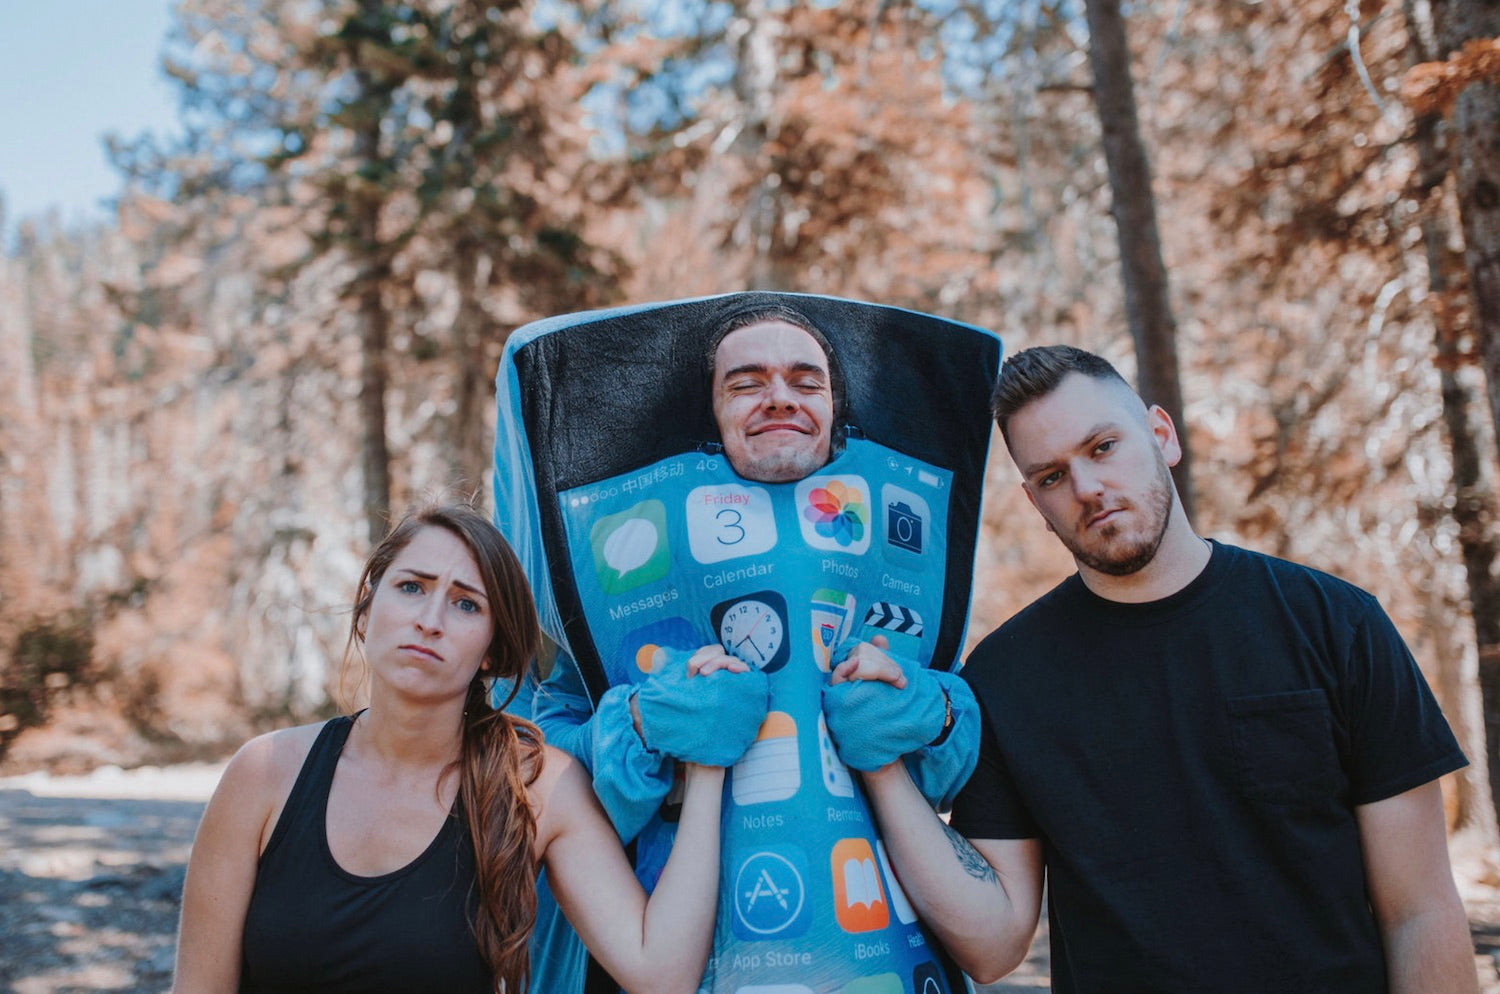 Image of two friends holding the hands of a guy in a iPhone costume